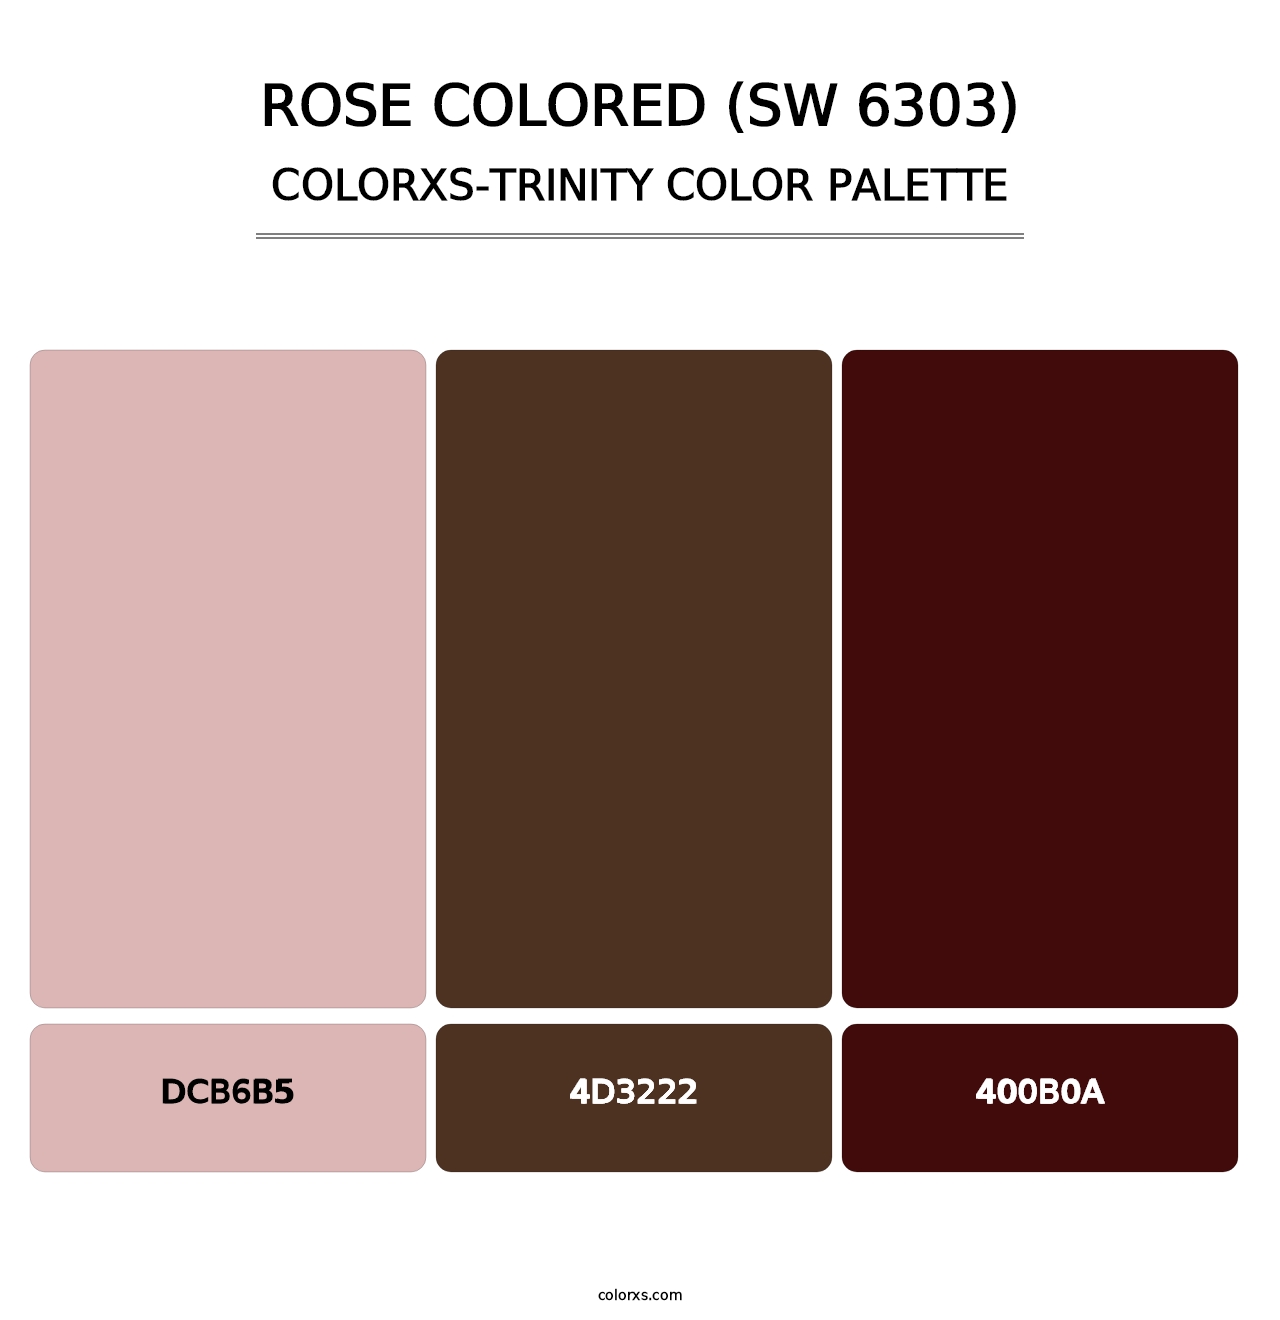 Rose Colored (SW 6303) - Colorxs Trinity Palette